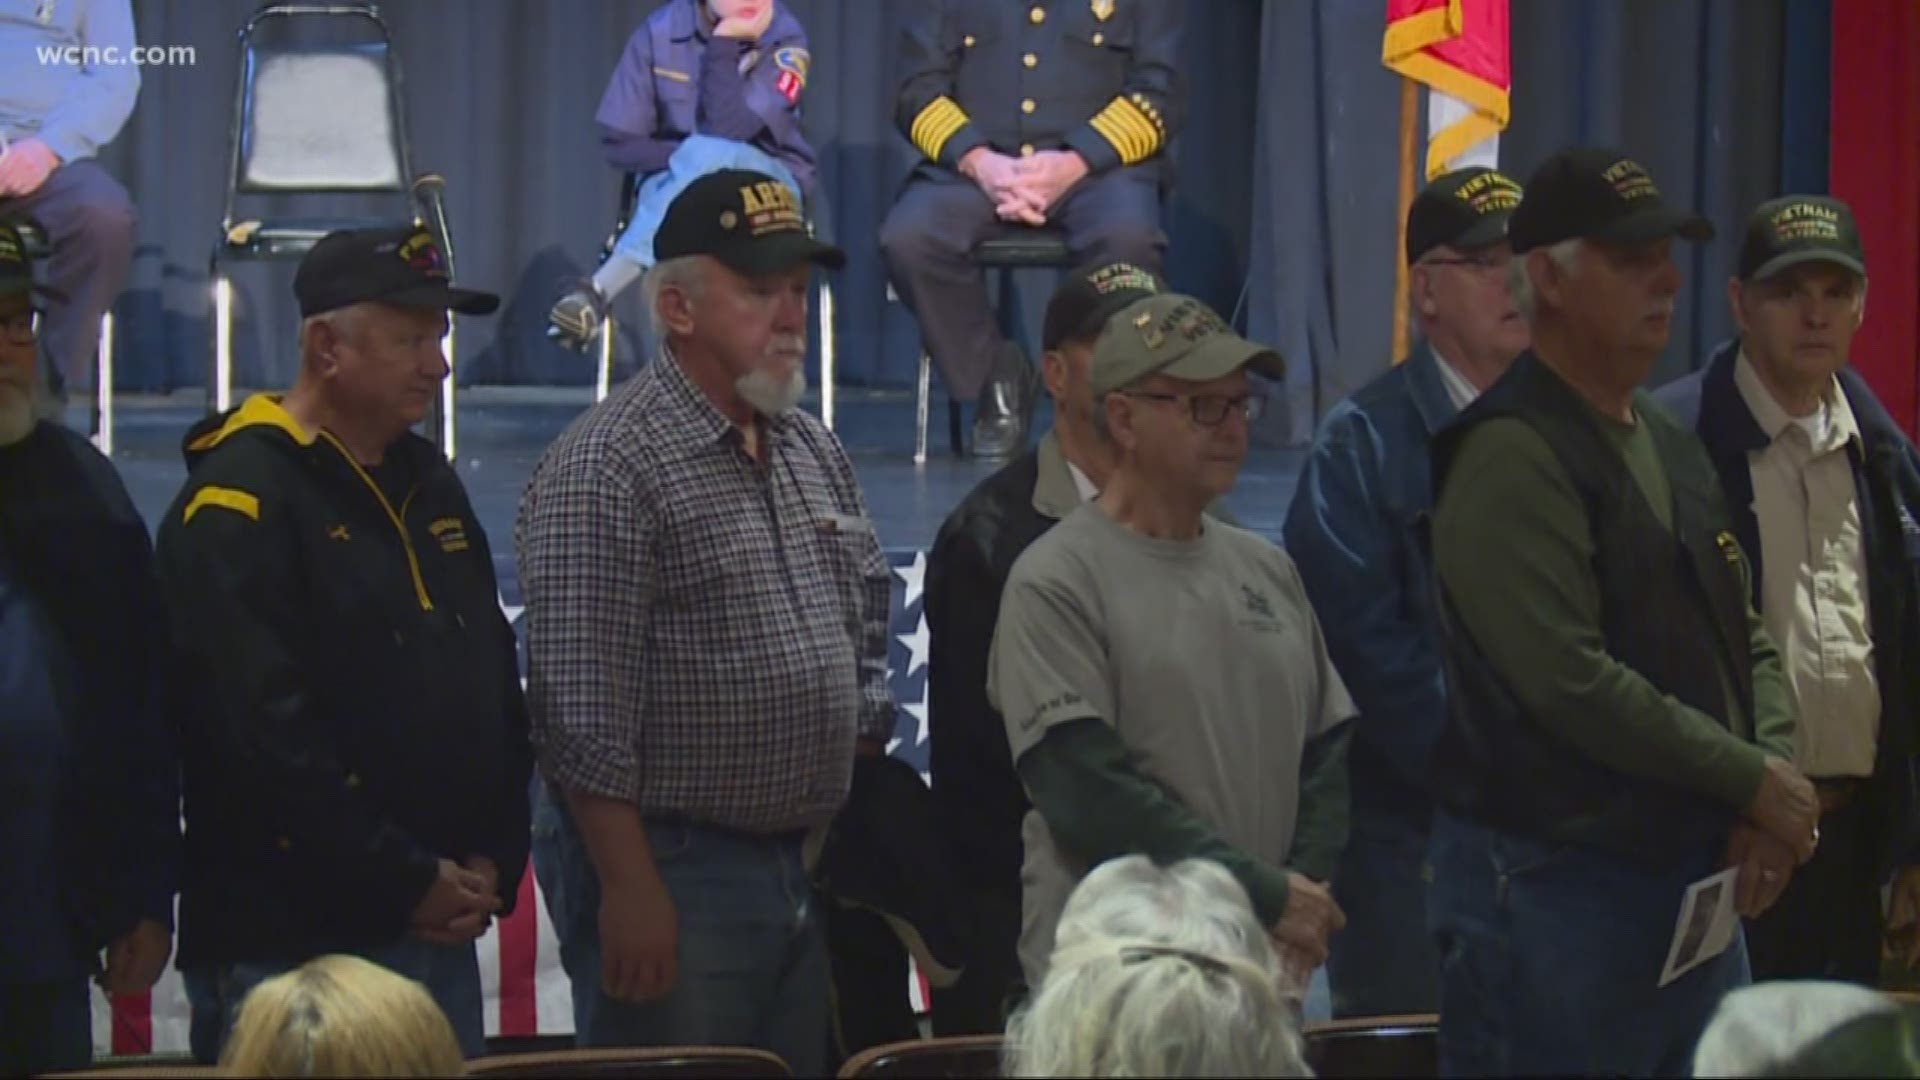 As millions honor veterans across the nation, a group of them in Kings Mountain isn't letting a little rain slow them down.